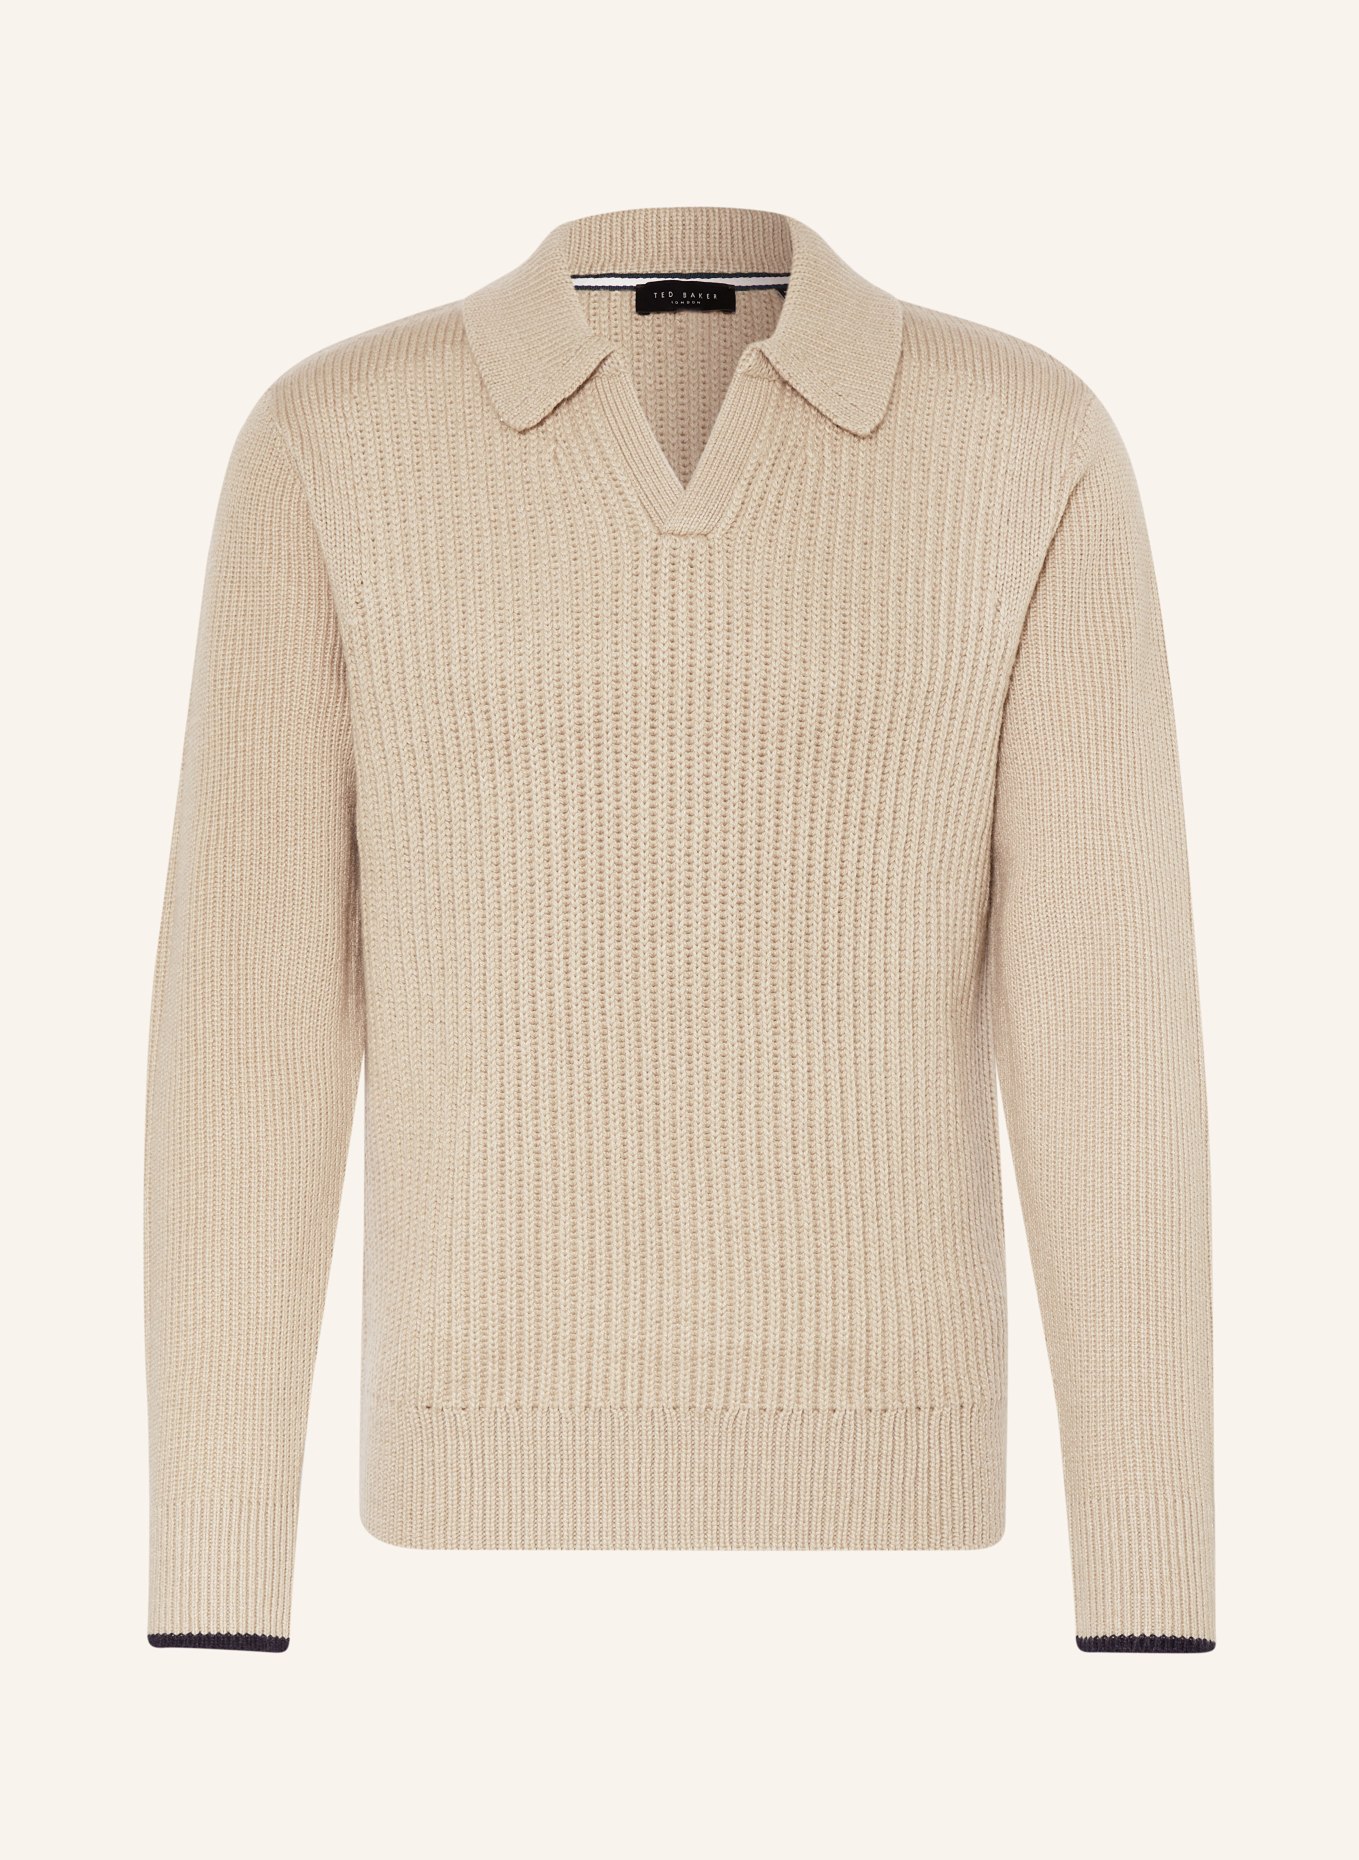 TED BAKER Pullover ADEMY, Farbe: TAUPE (Bild 1)